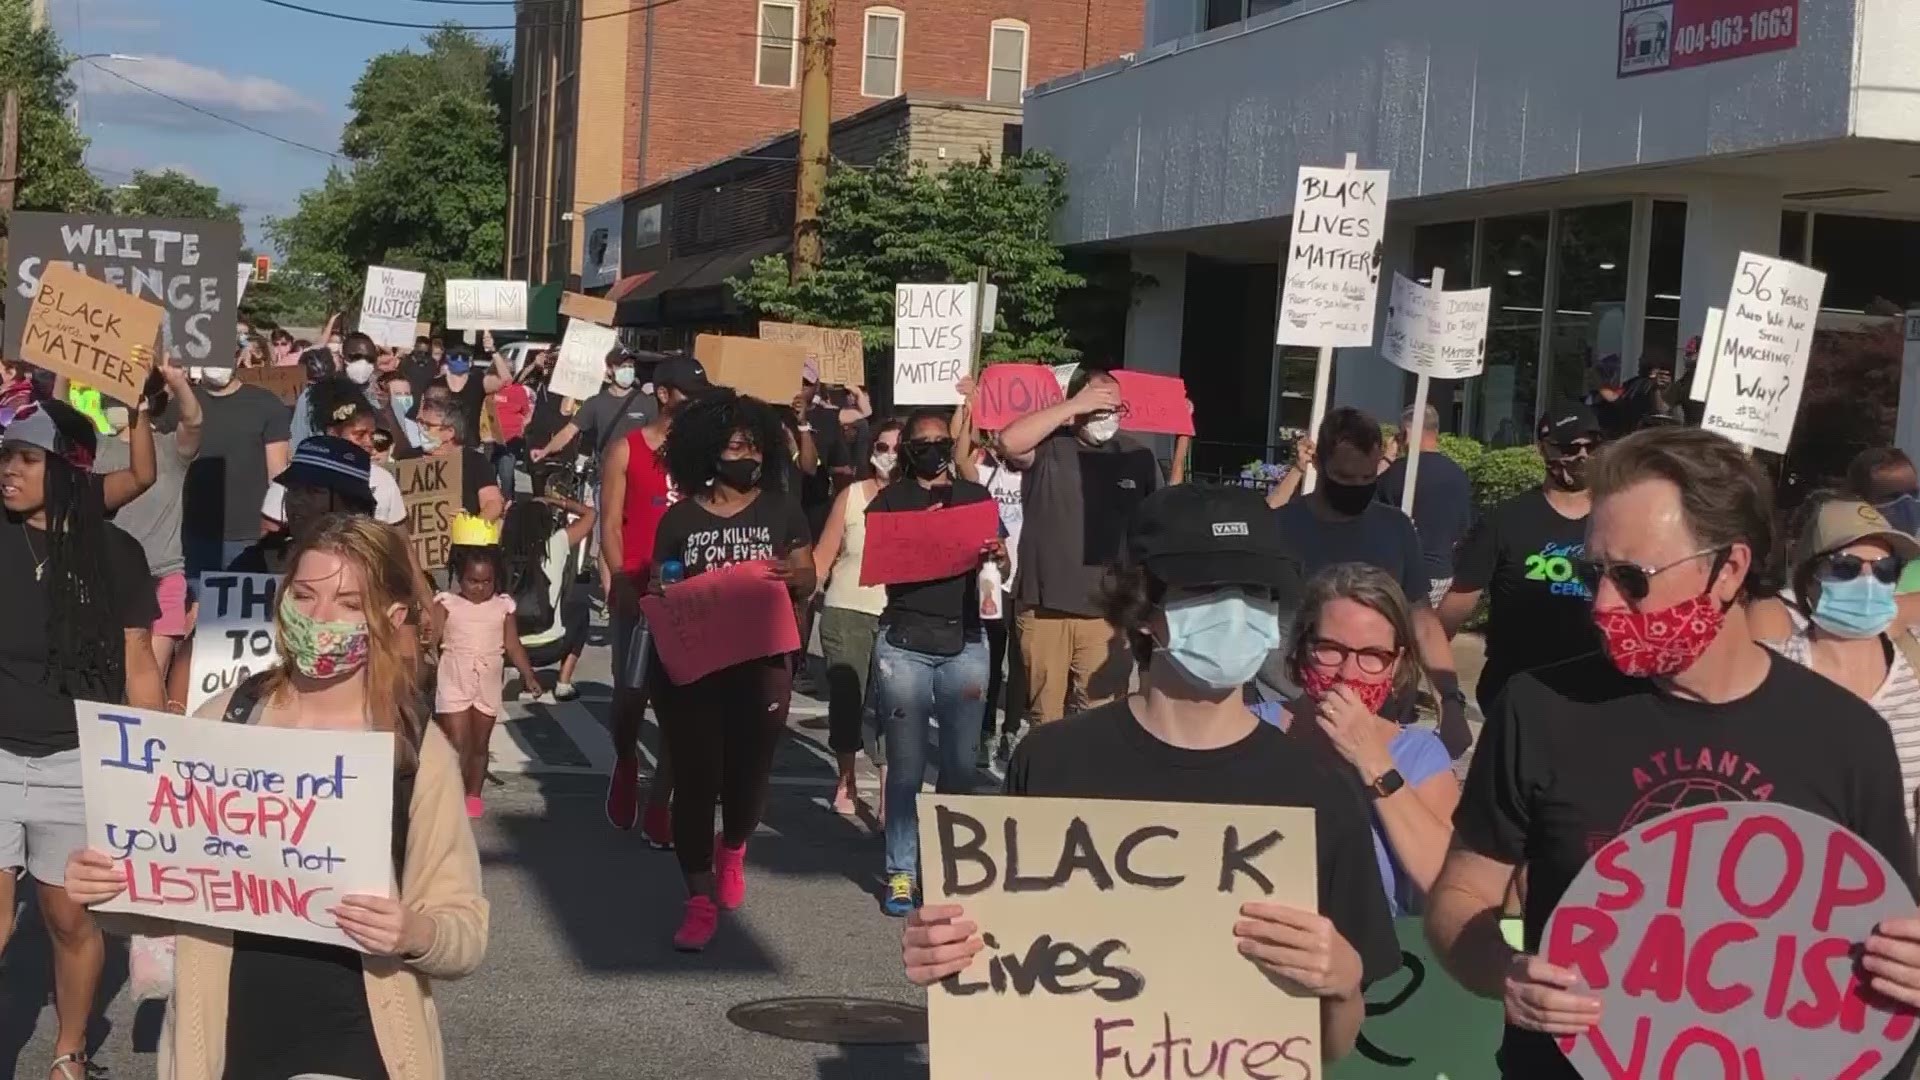 Over 100 residents participated in the two-mile march protesting police violence